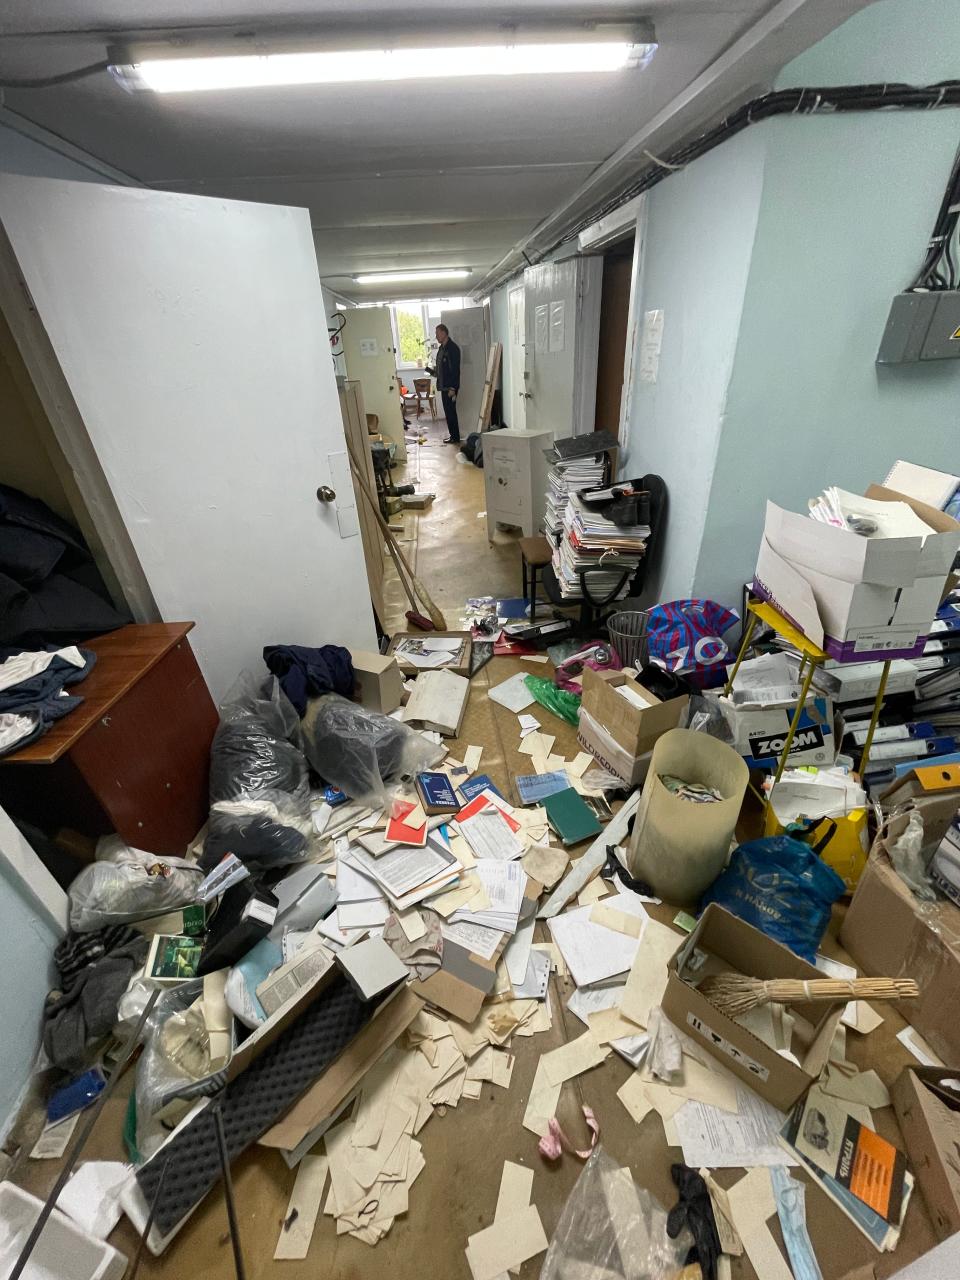 A room full of paperwork is part of the aftermath after Russian troops fled the Chernobyl nuclear power plant.